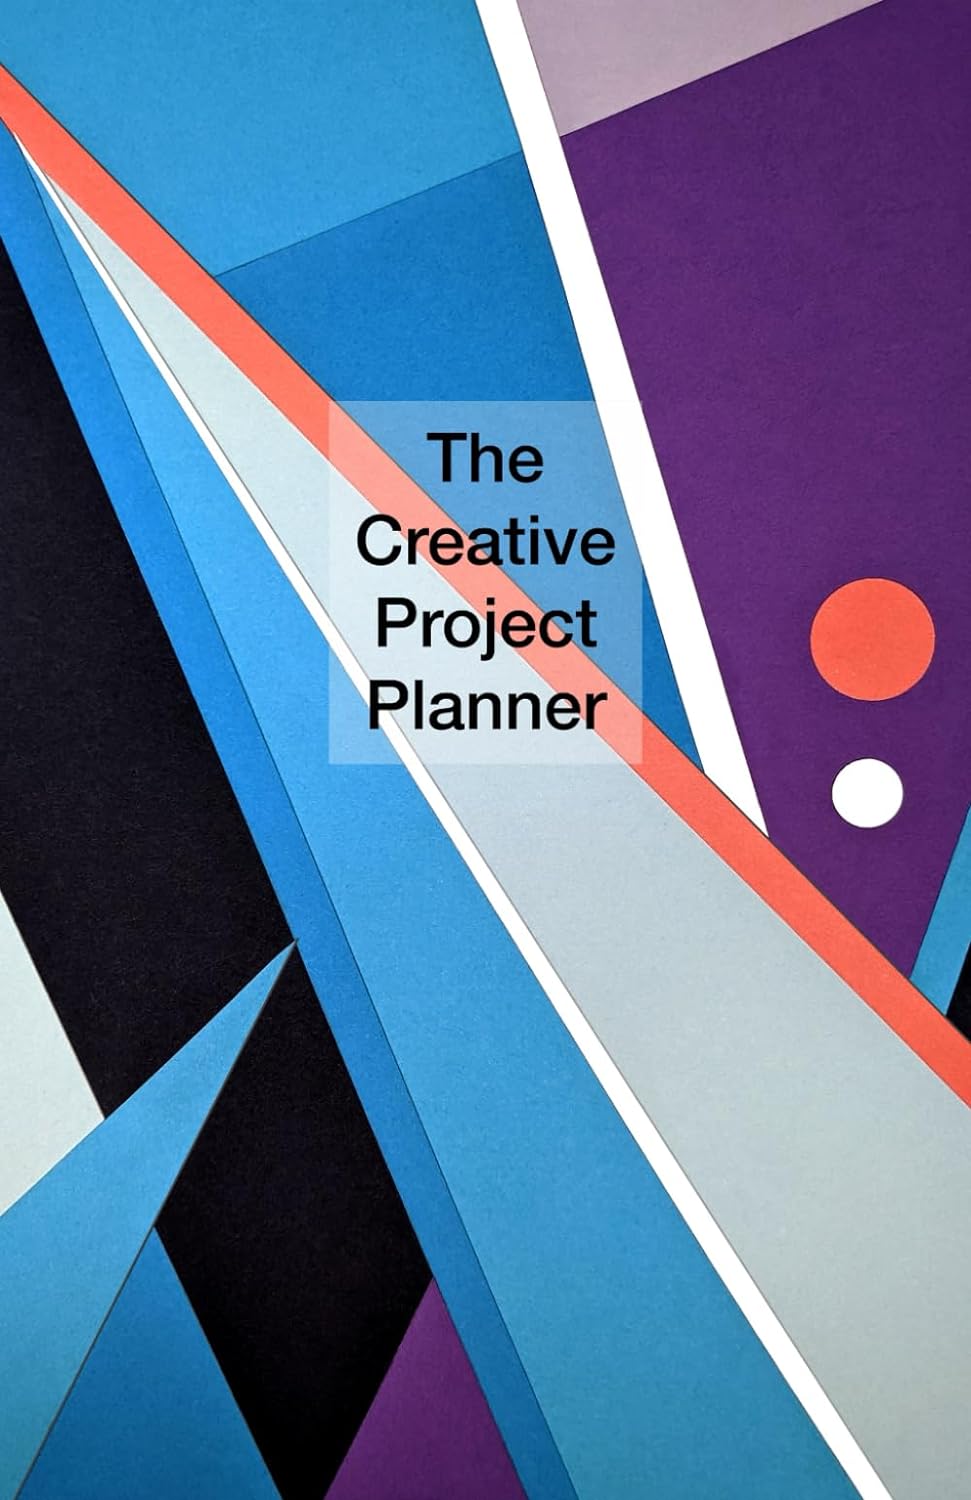 The Creative Project Planner